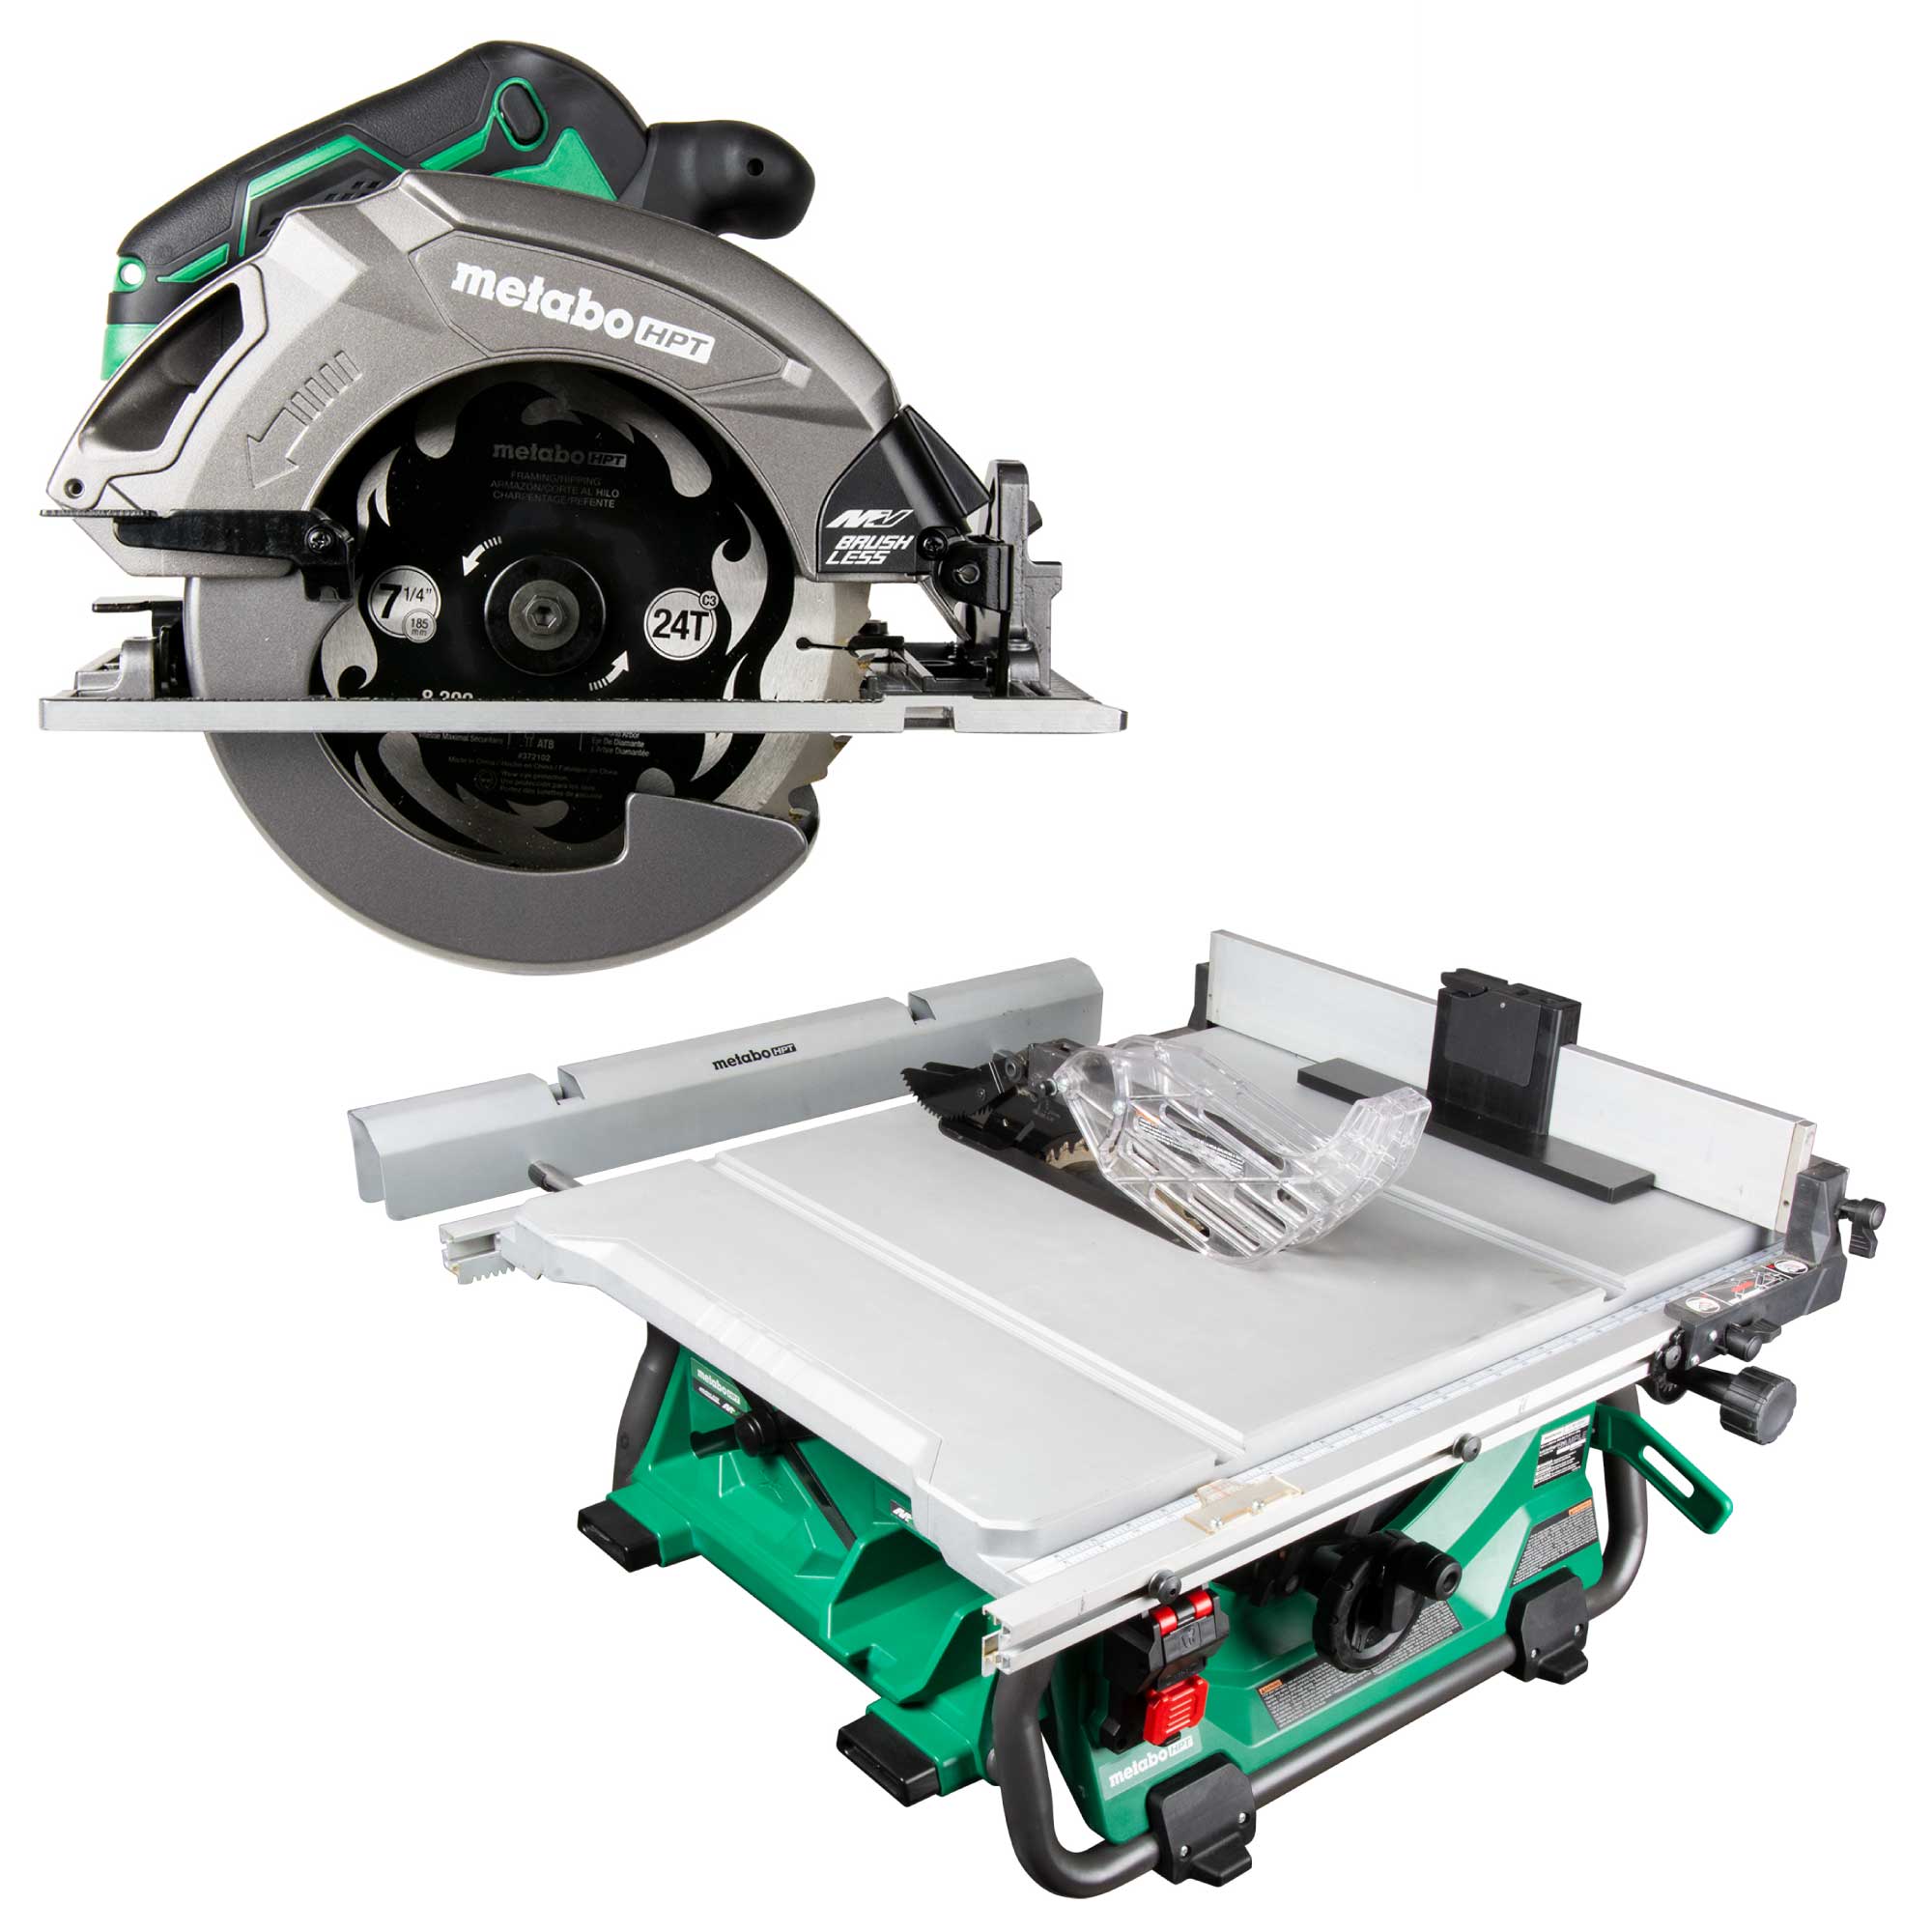 Metabo HPT MultiVolt 36-Volt 7-1/4-in Brushless Circular Saw with MultiVolt 36-Volt 10-In Carbide-Tipped Blade Portable Cordless Table Saw